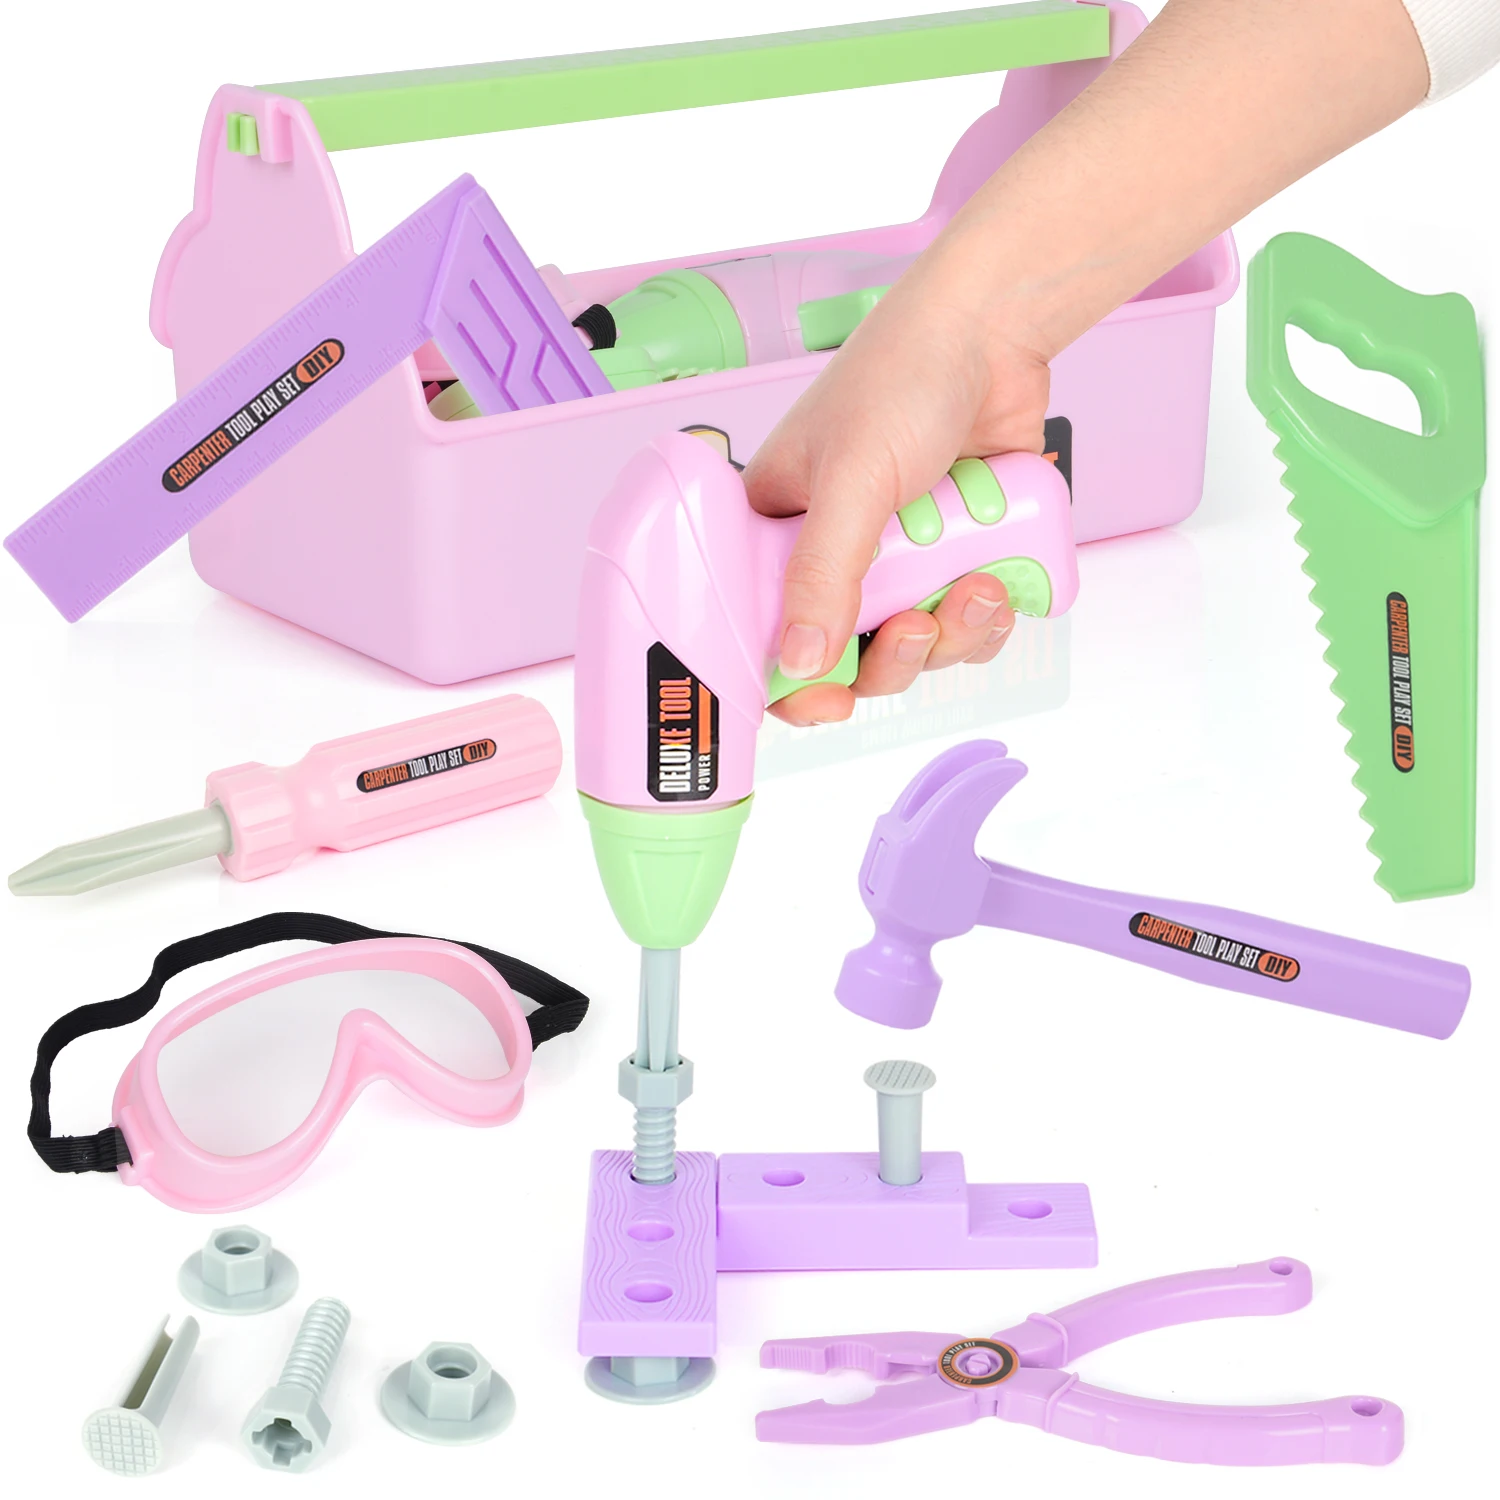 Pretend Play ​Preschool Toys for 3 4 5 6 Years Old Toddlers Kids Girls EXERCISENPLAY Kids Construction Tool Set Playset Pink 